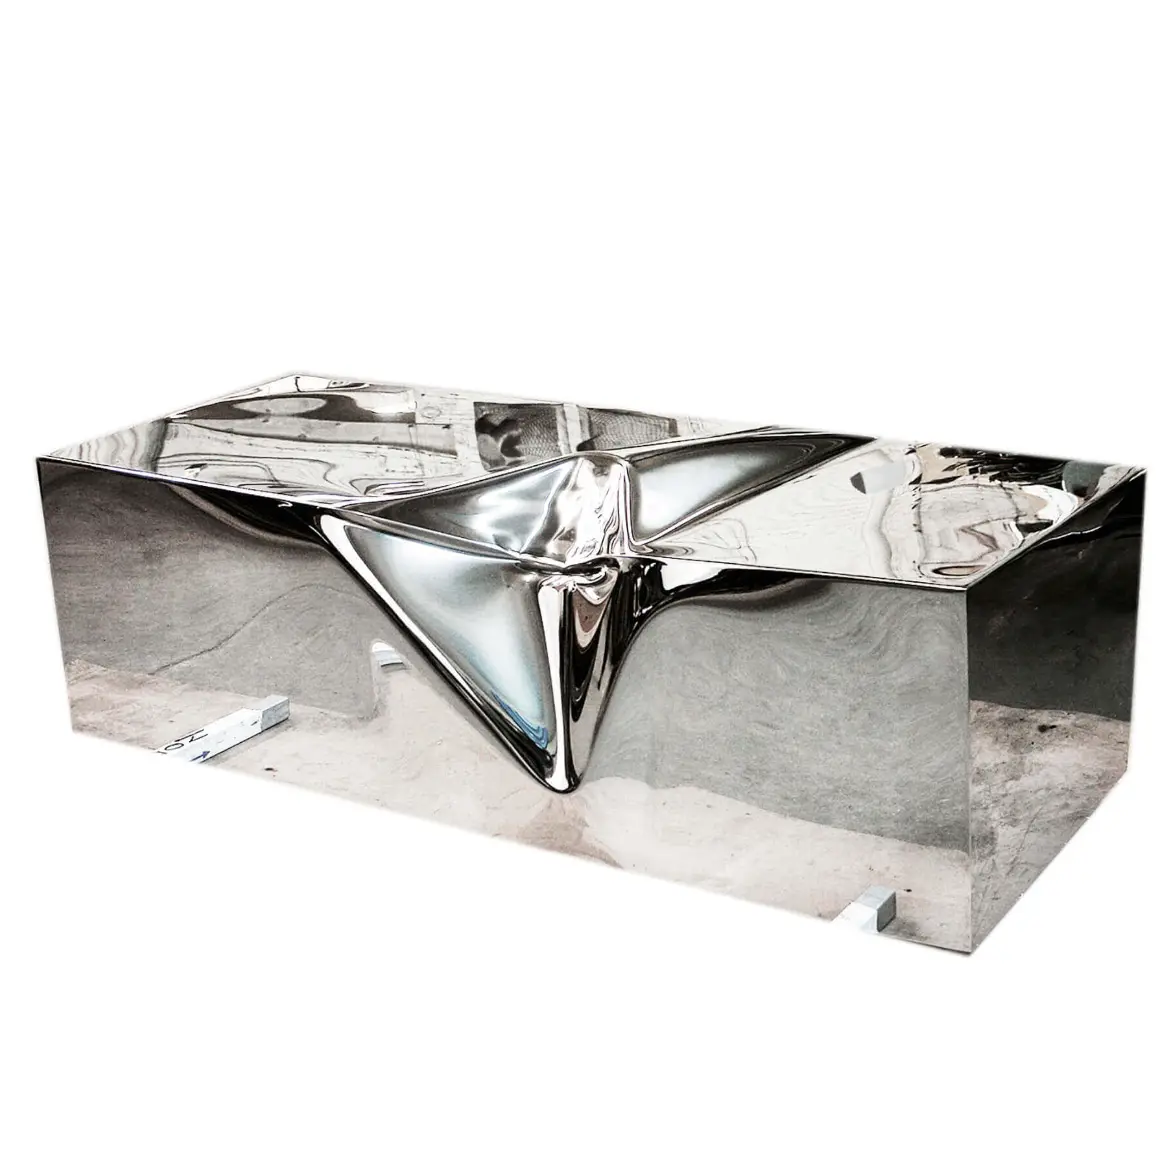 304 stainless steel cuboid with a recessed design in the middle of the mirror tea table